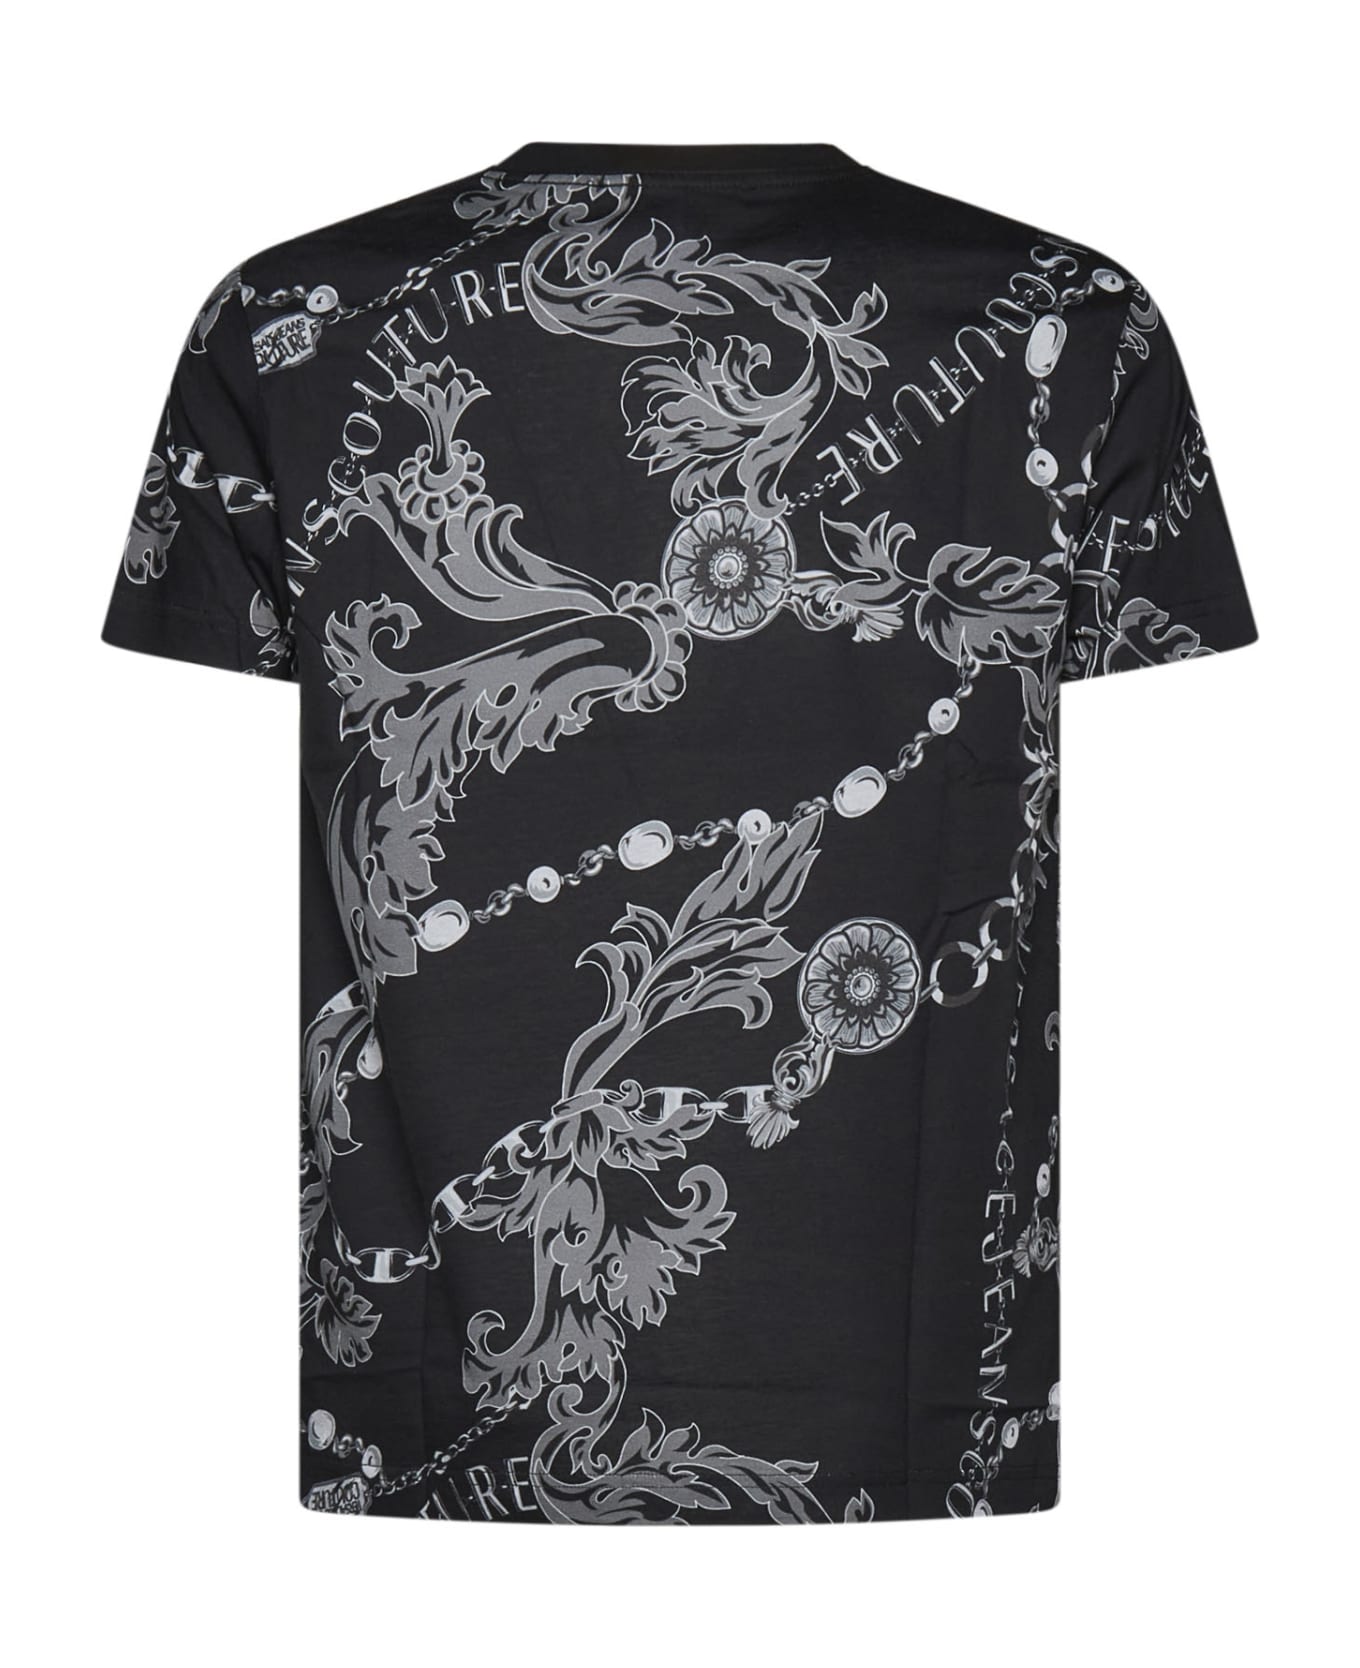 Versace Jeans Couture Chain Couture T-shirt - Black